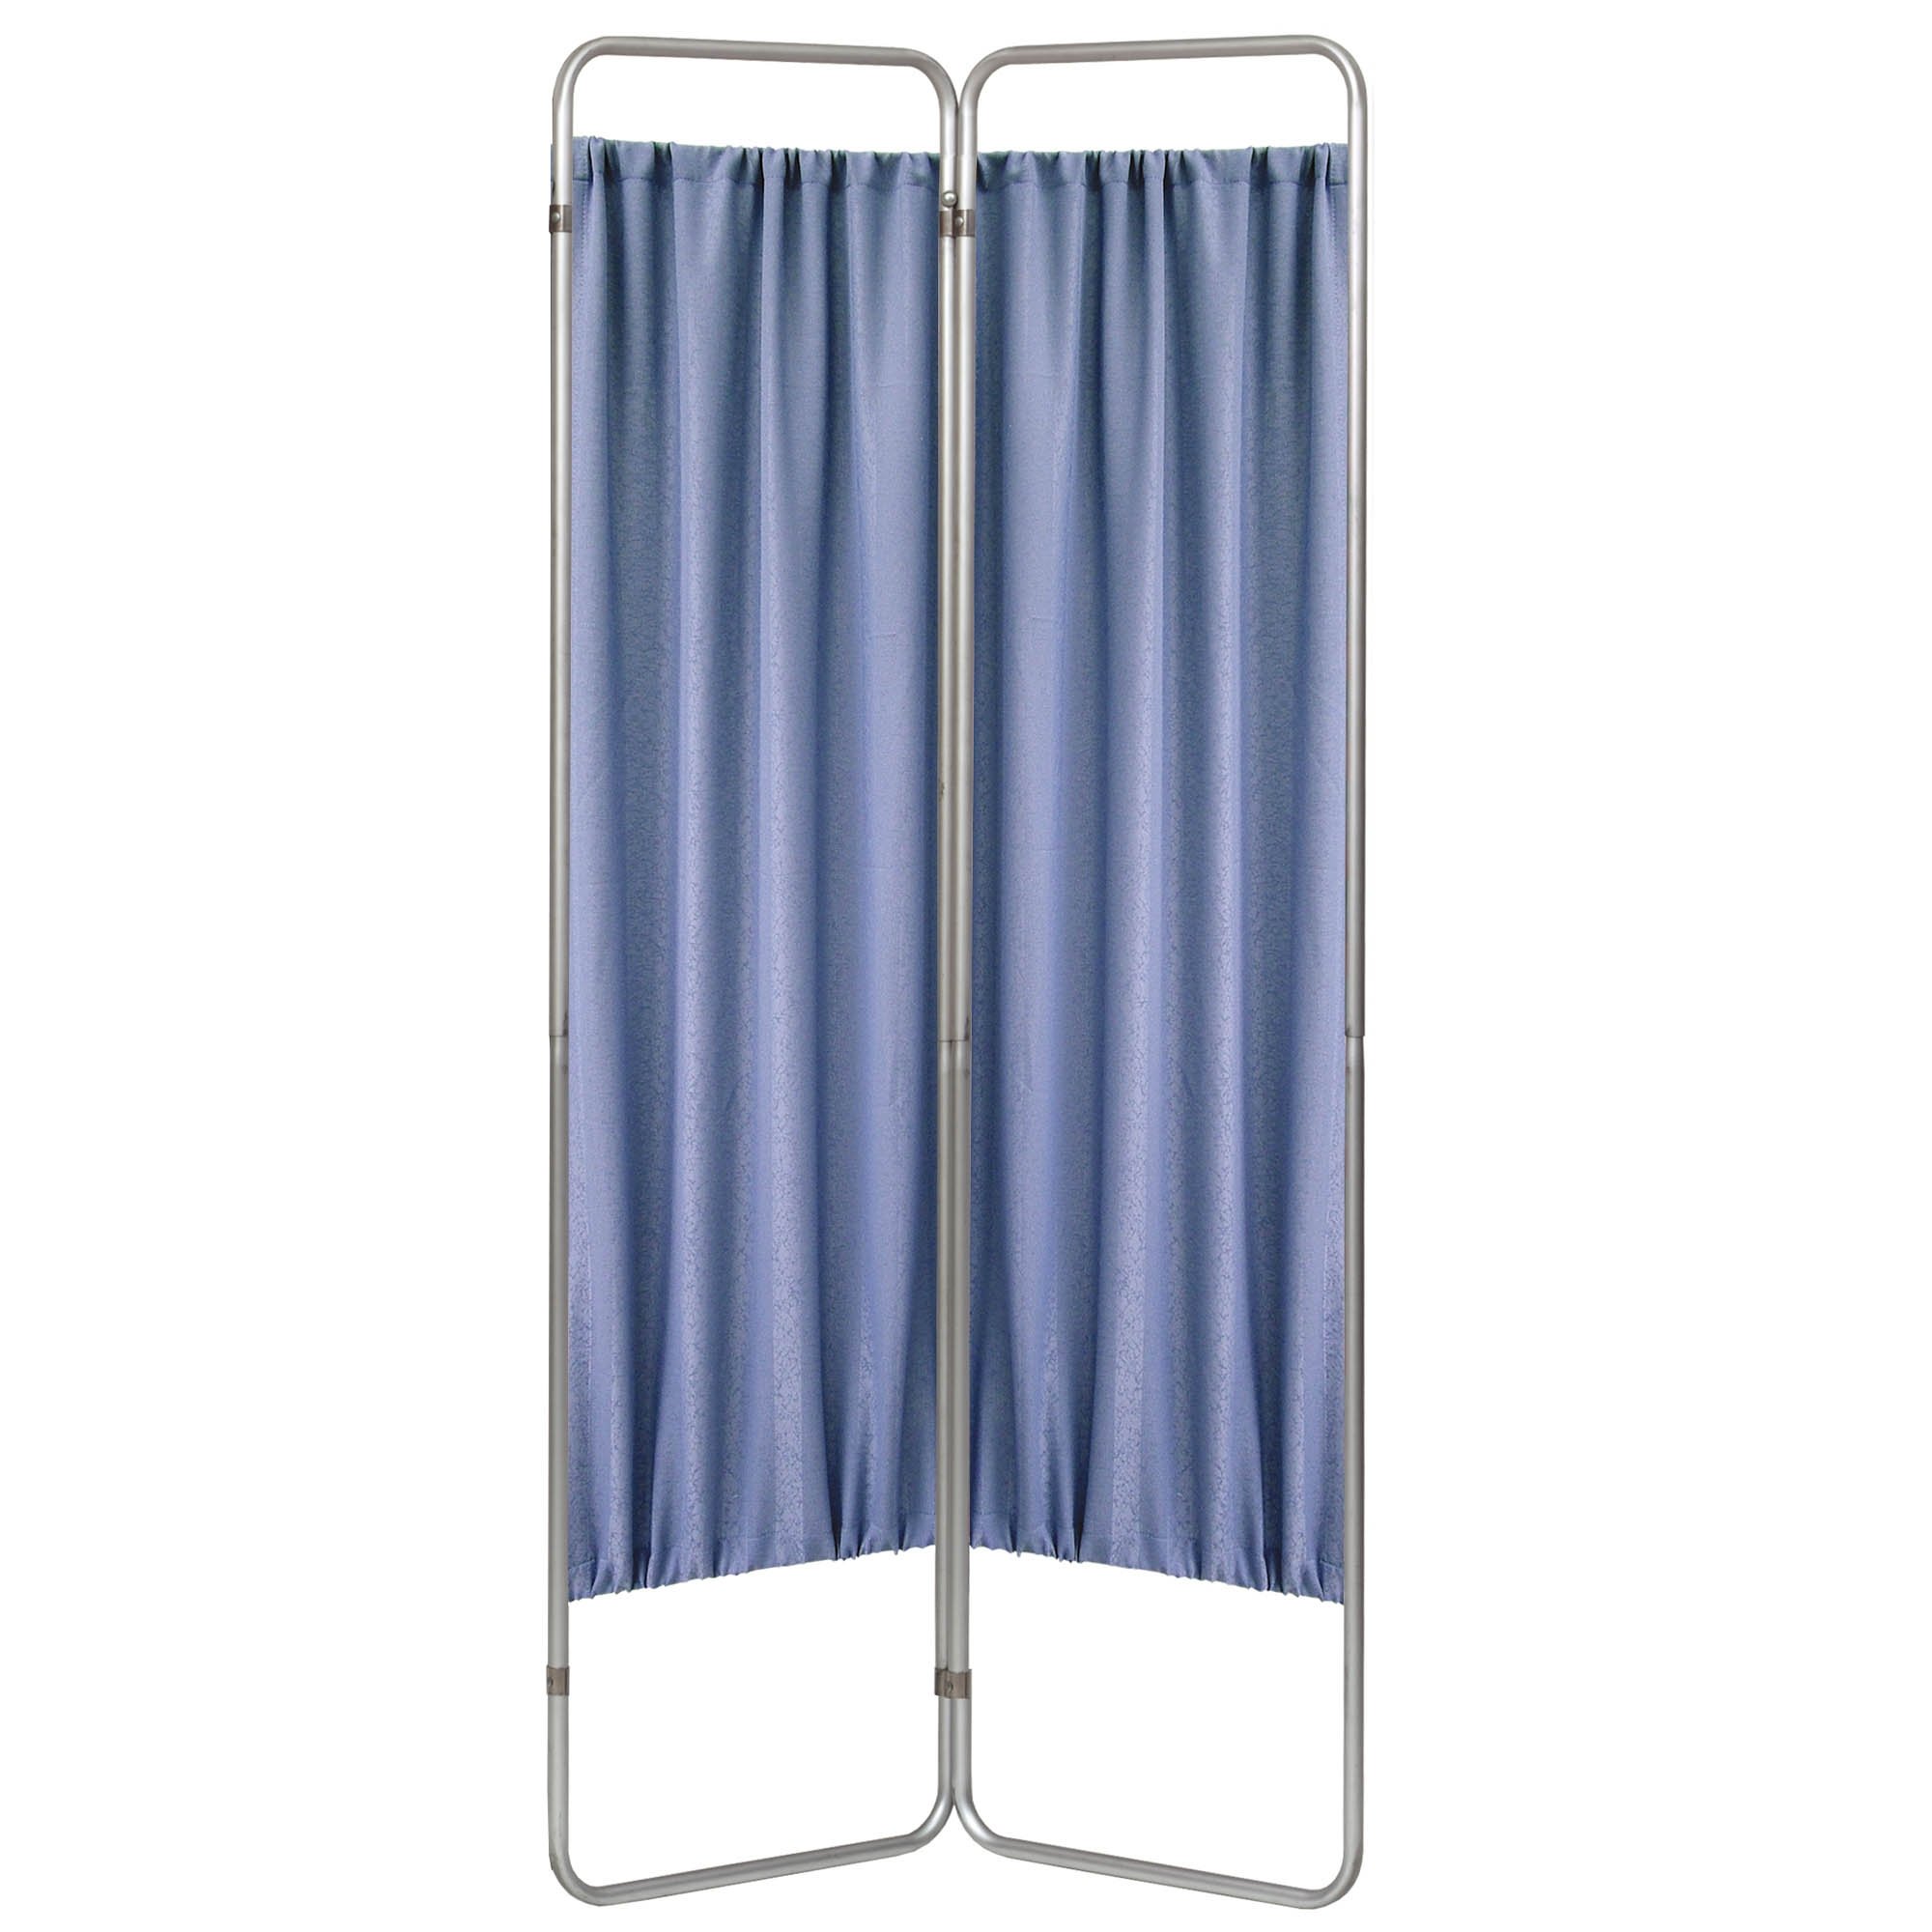 Economy 2 Section Folding Privacy Screen - Norway Designer Cloth Screen Panel